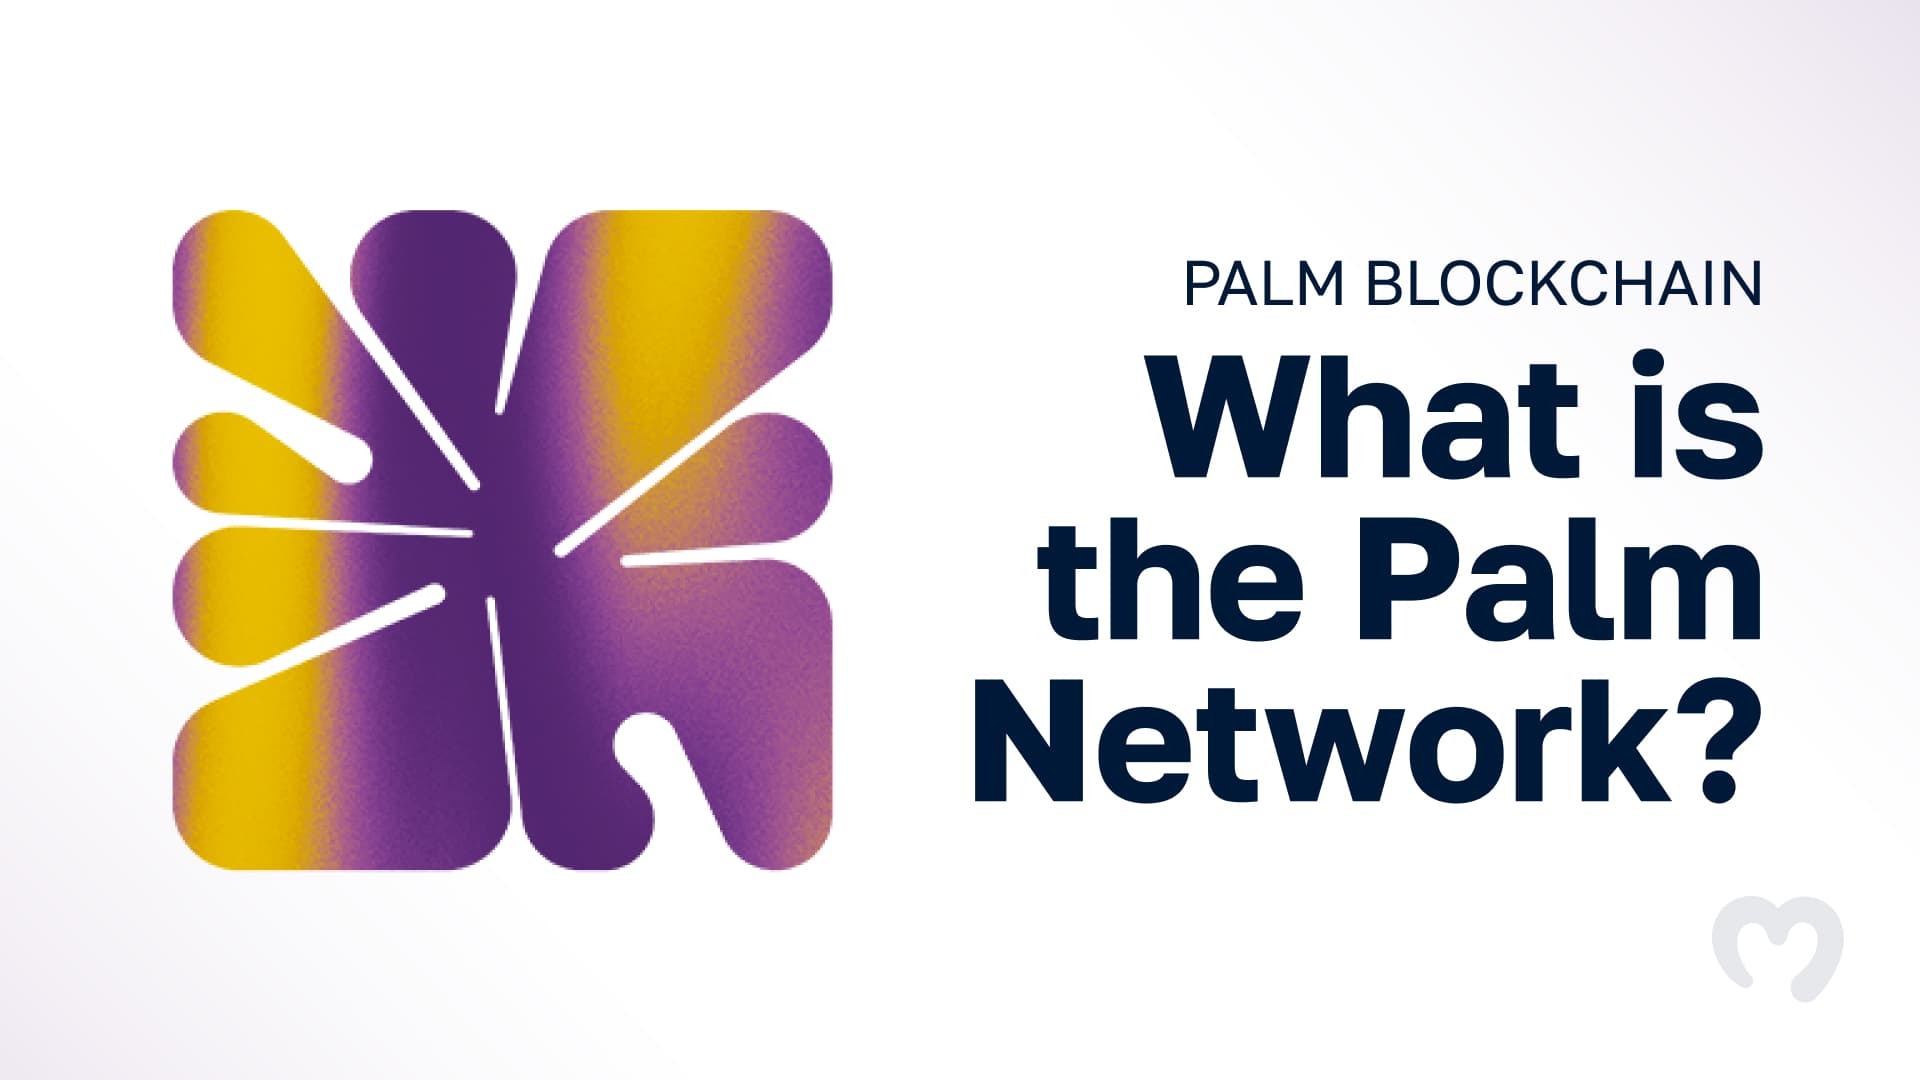 What is the Palm Blockchain Network?